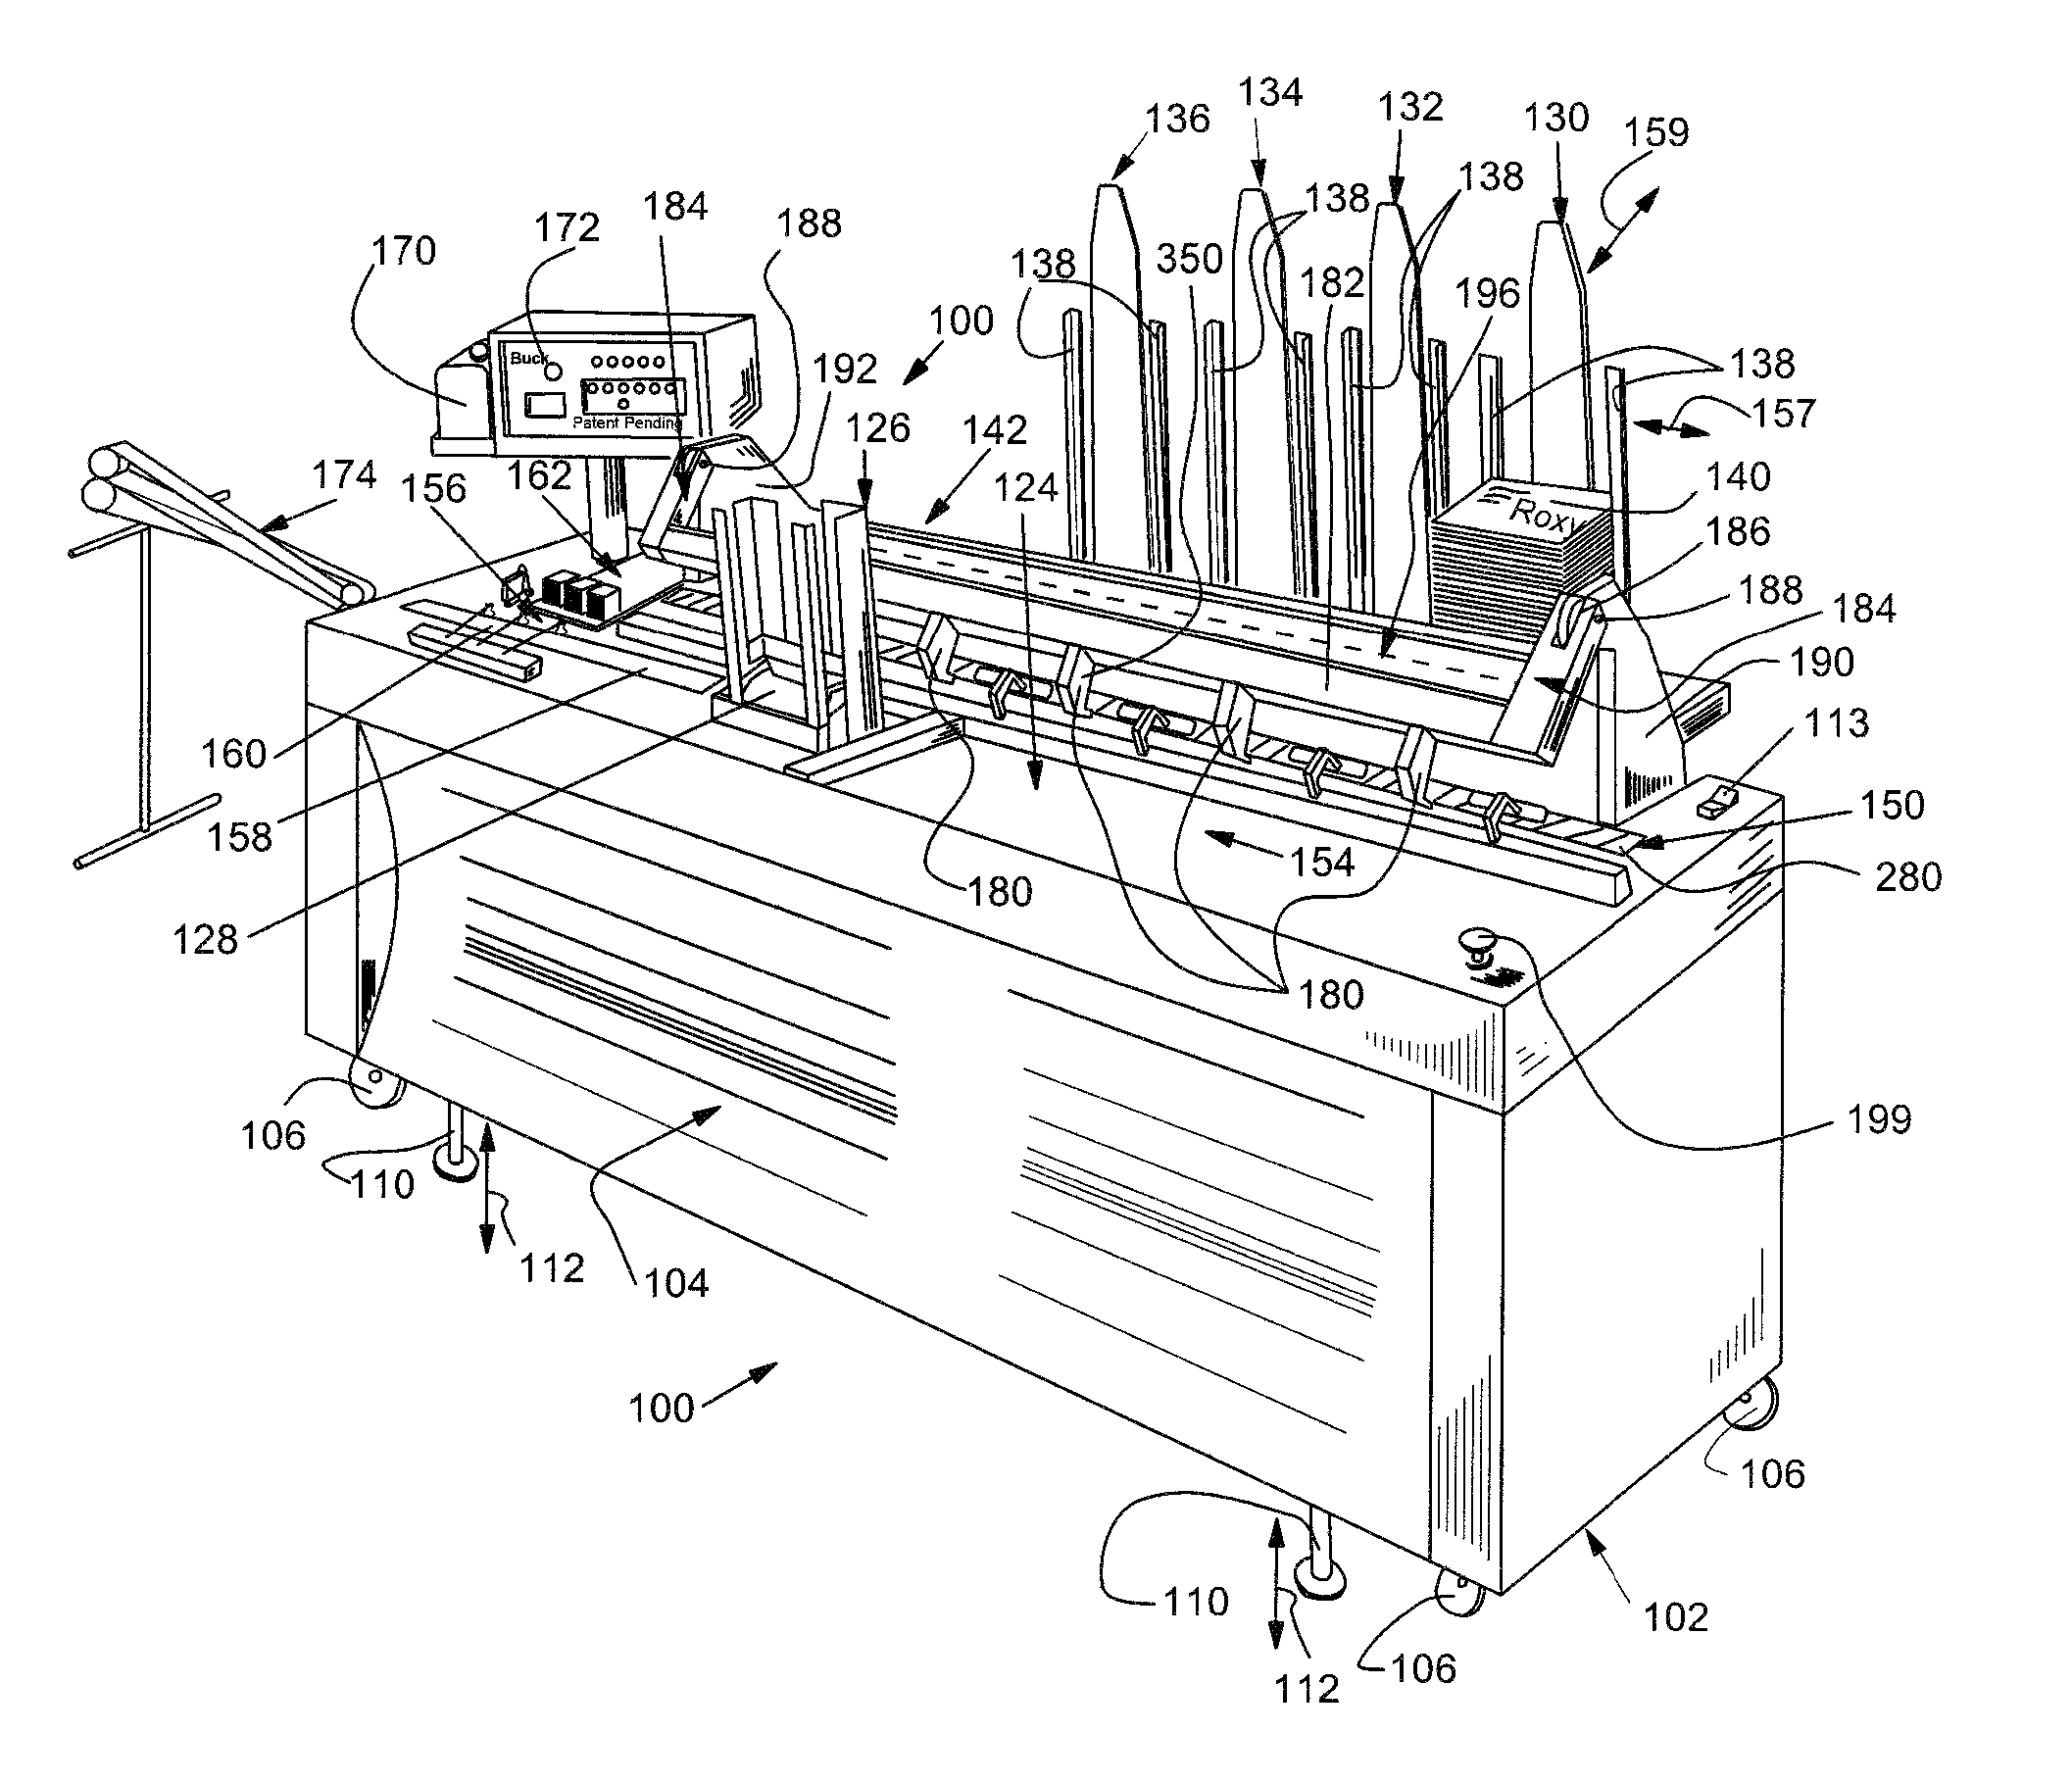 System and method for high-speed insertion of envelopes